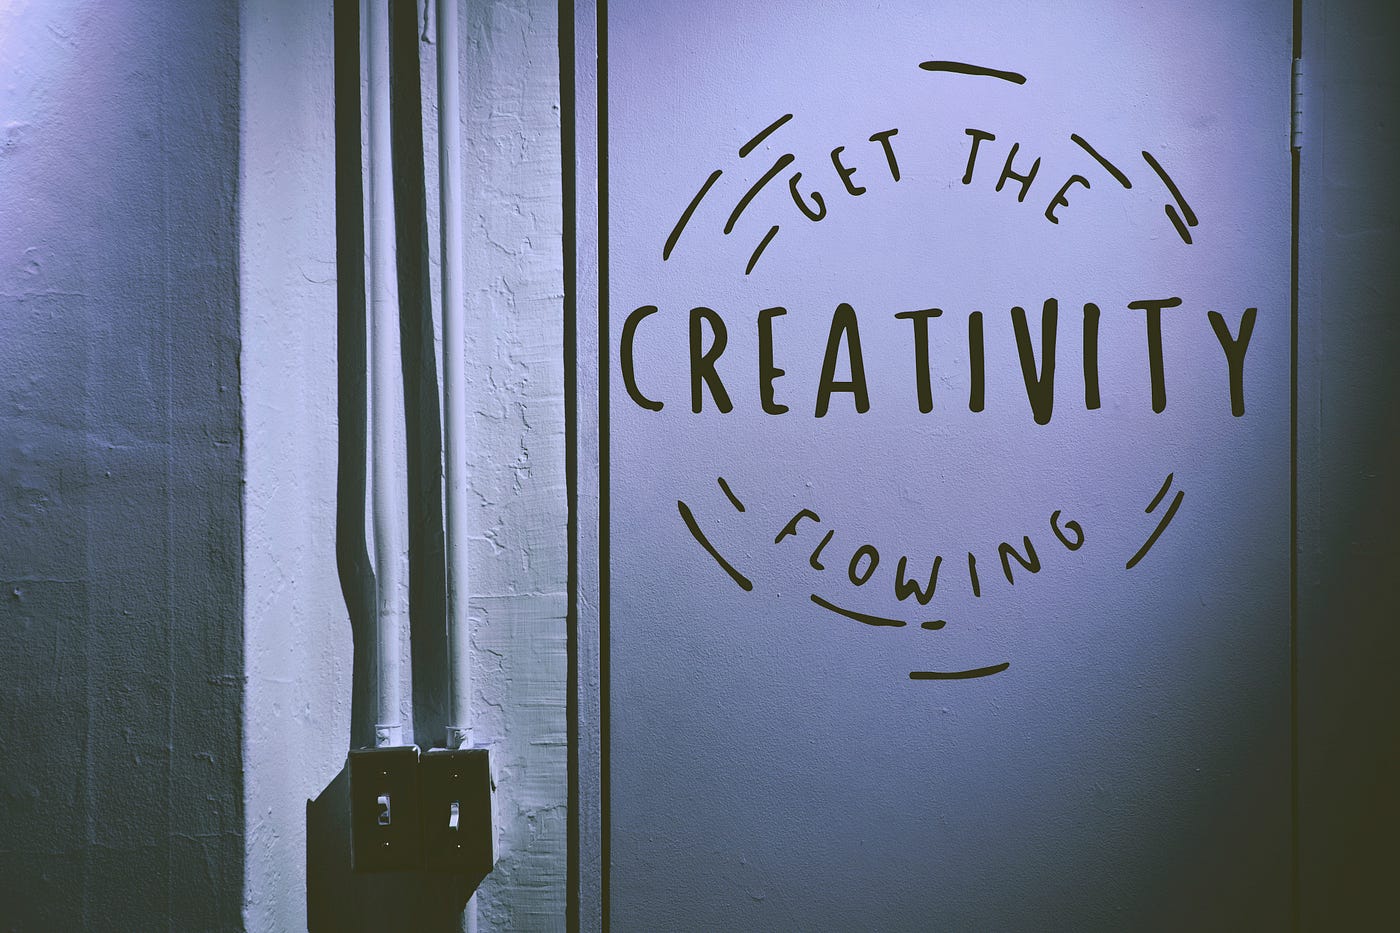 DC (V) Find Your Creative Self with 'The Artists Way' - Interest